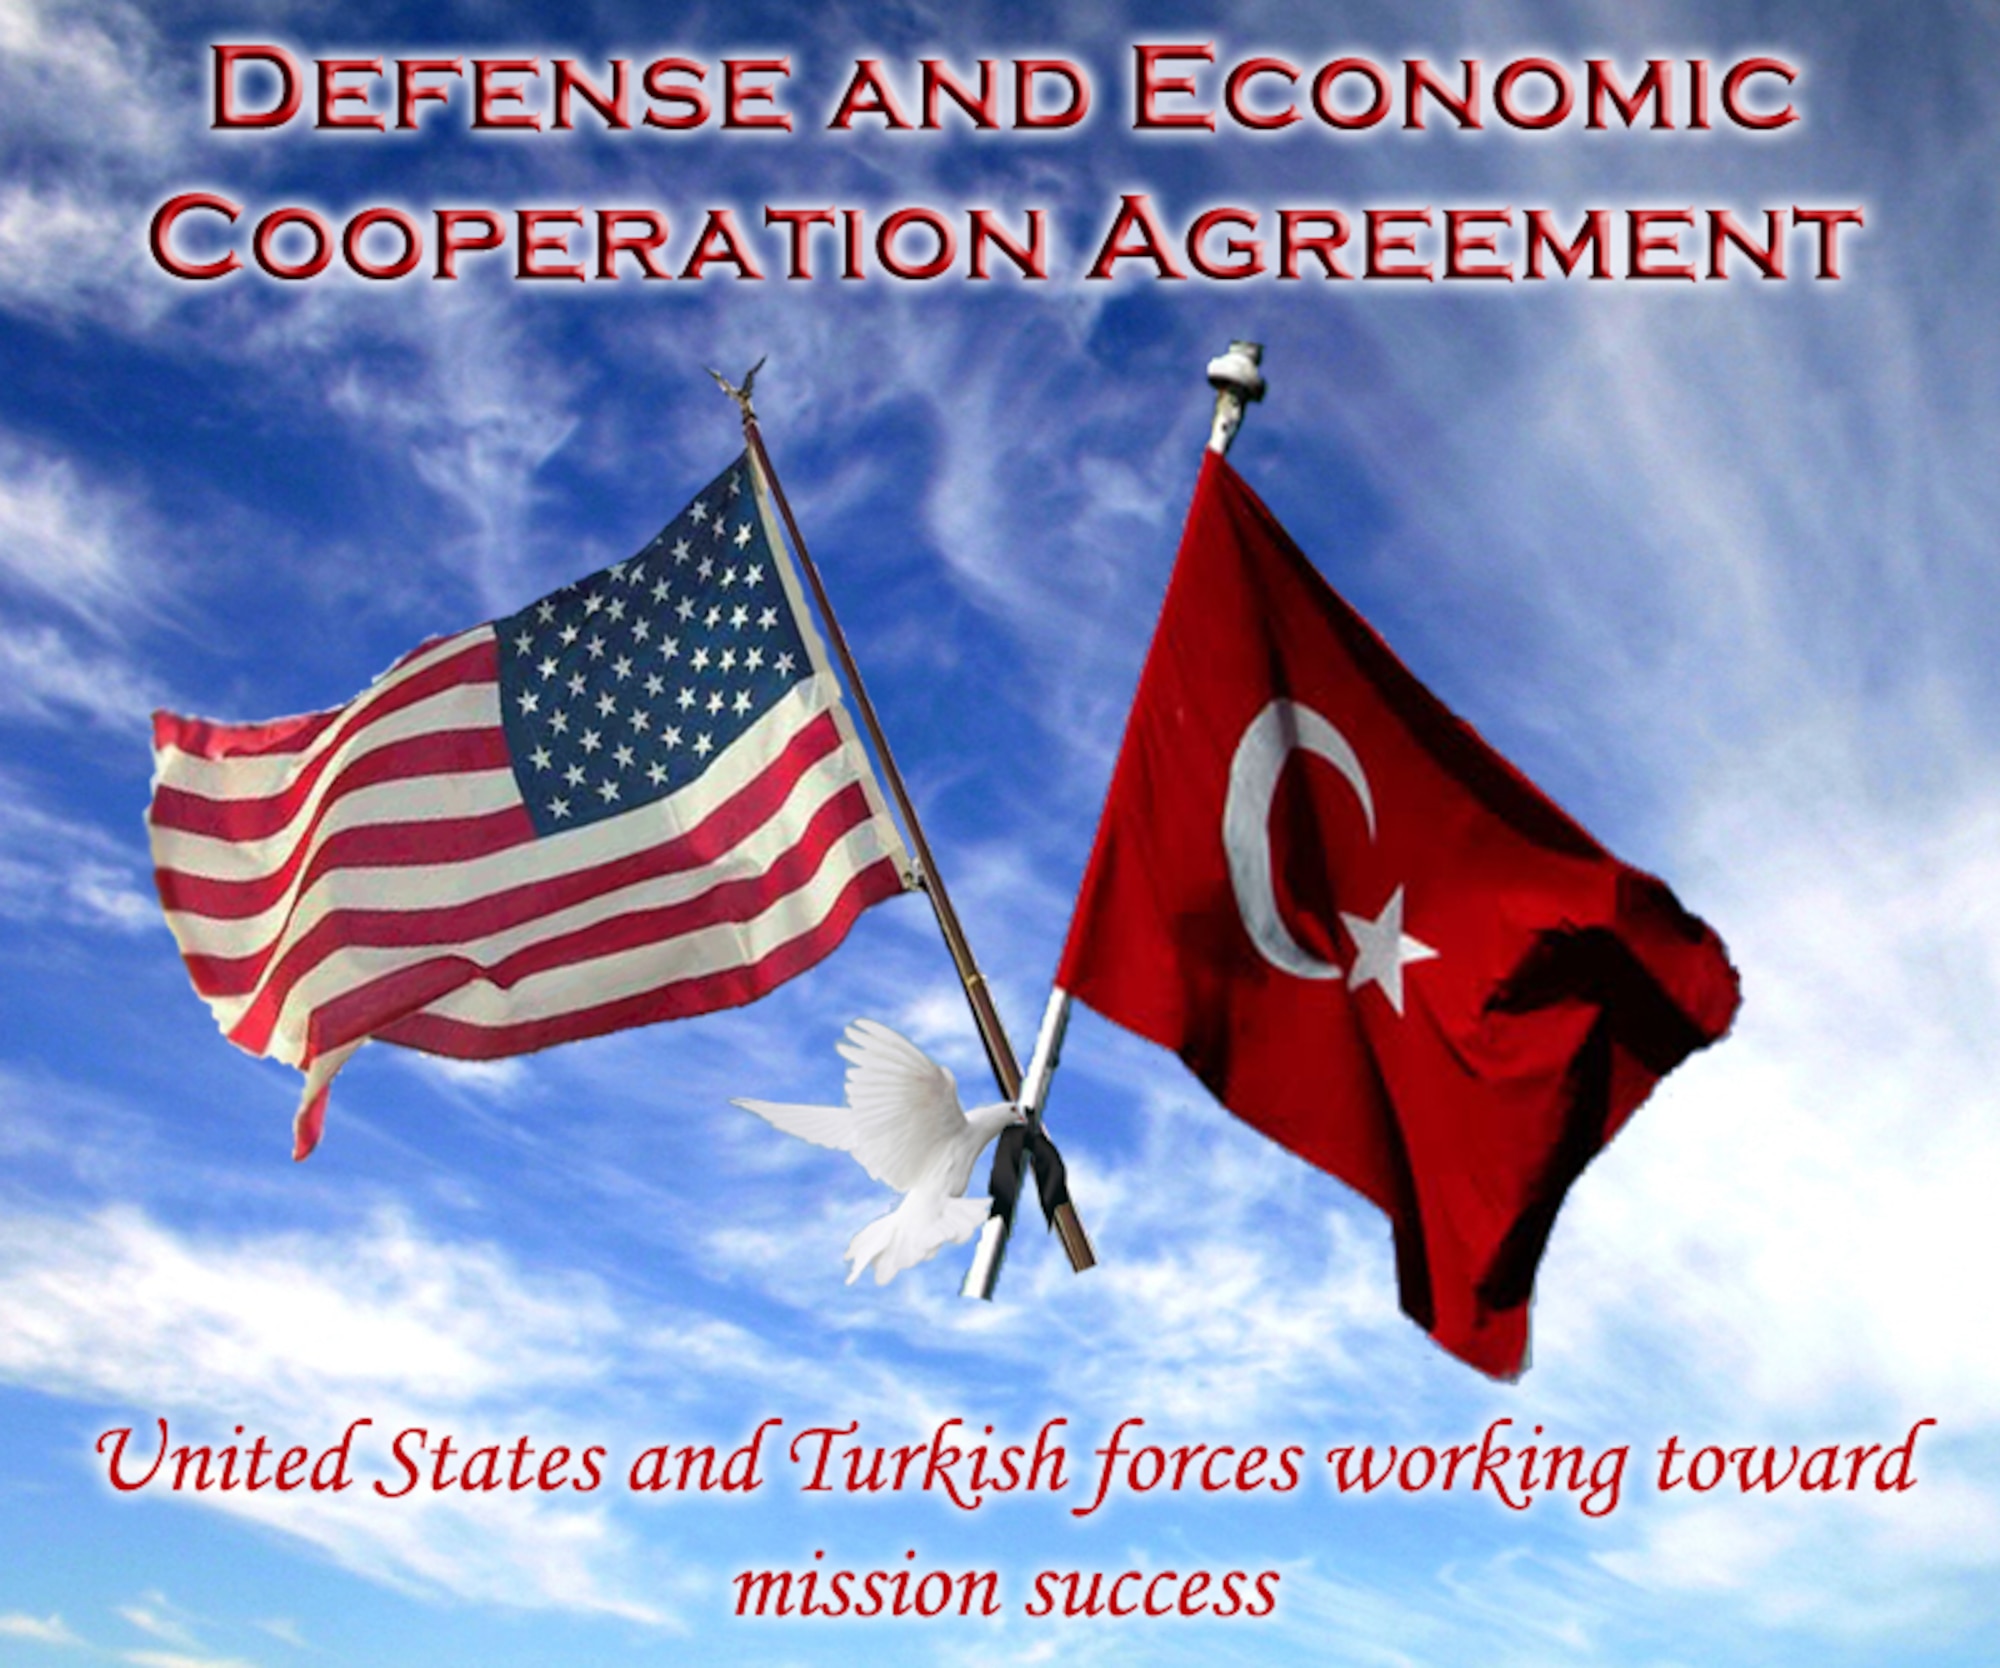 A joint team led by the office of defense cooperation-Ankara and the Turkish General Staff will arrive at Incirlik Nov. 5 to perform a compliance review as required by the 28-year old Defense and Economic Cooperation Agreement between the United States and Turkey. (U.S. Air Force graphic/ Airman 1st Class Amber Ashcraft)